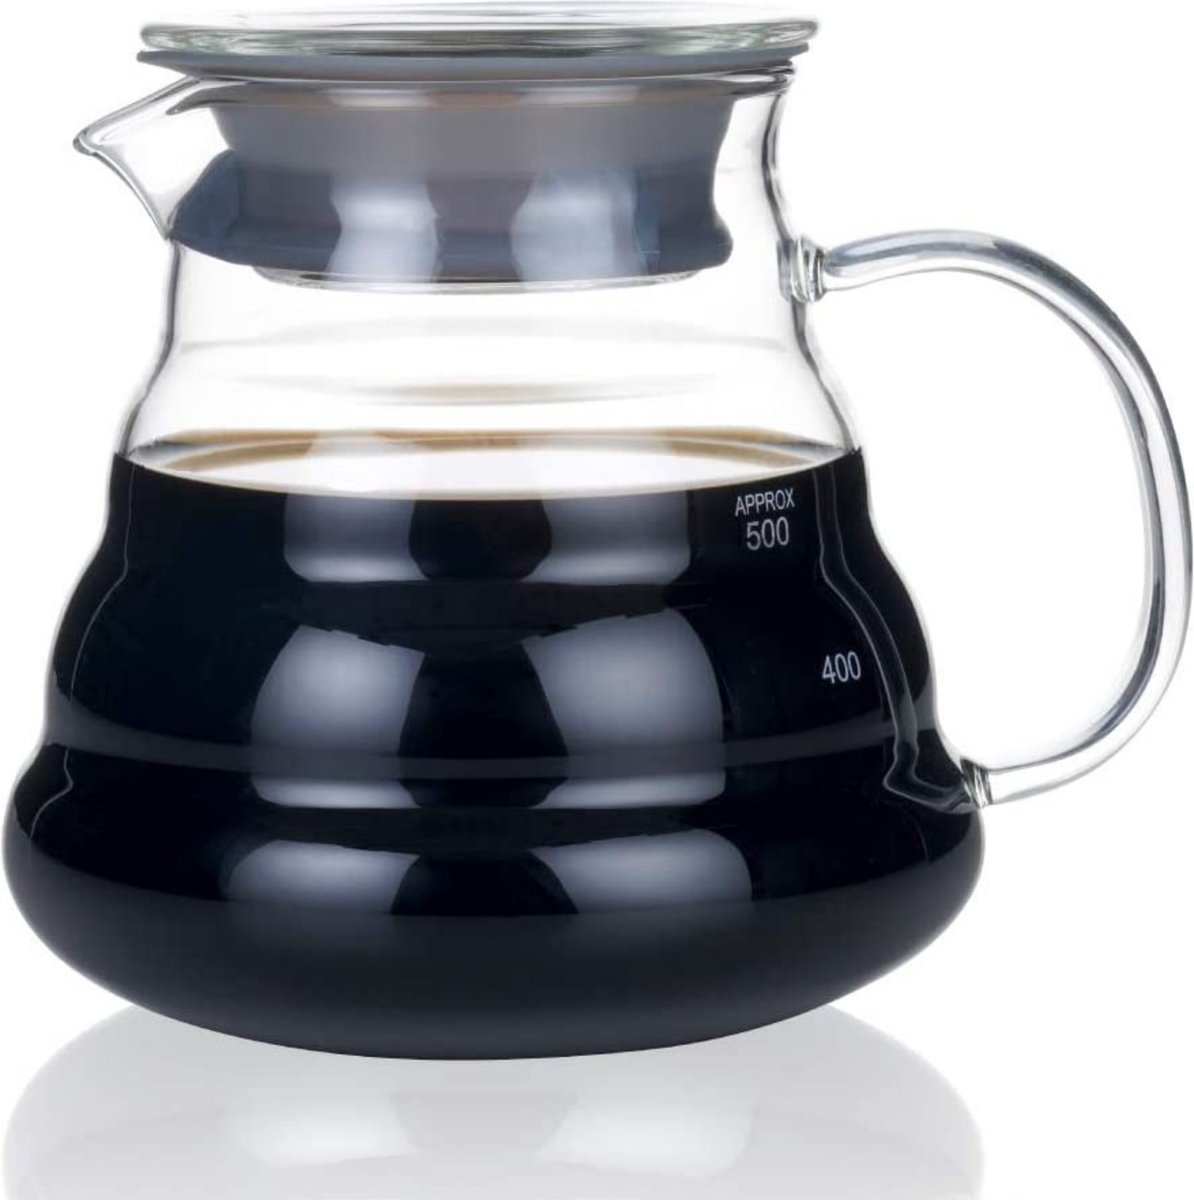 House of Husk® Koffiekan - Pour Over Koffiepot - Coffee Server - Slow Coffee - Glazen Cafetière - Maat 500ml